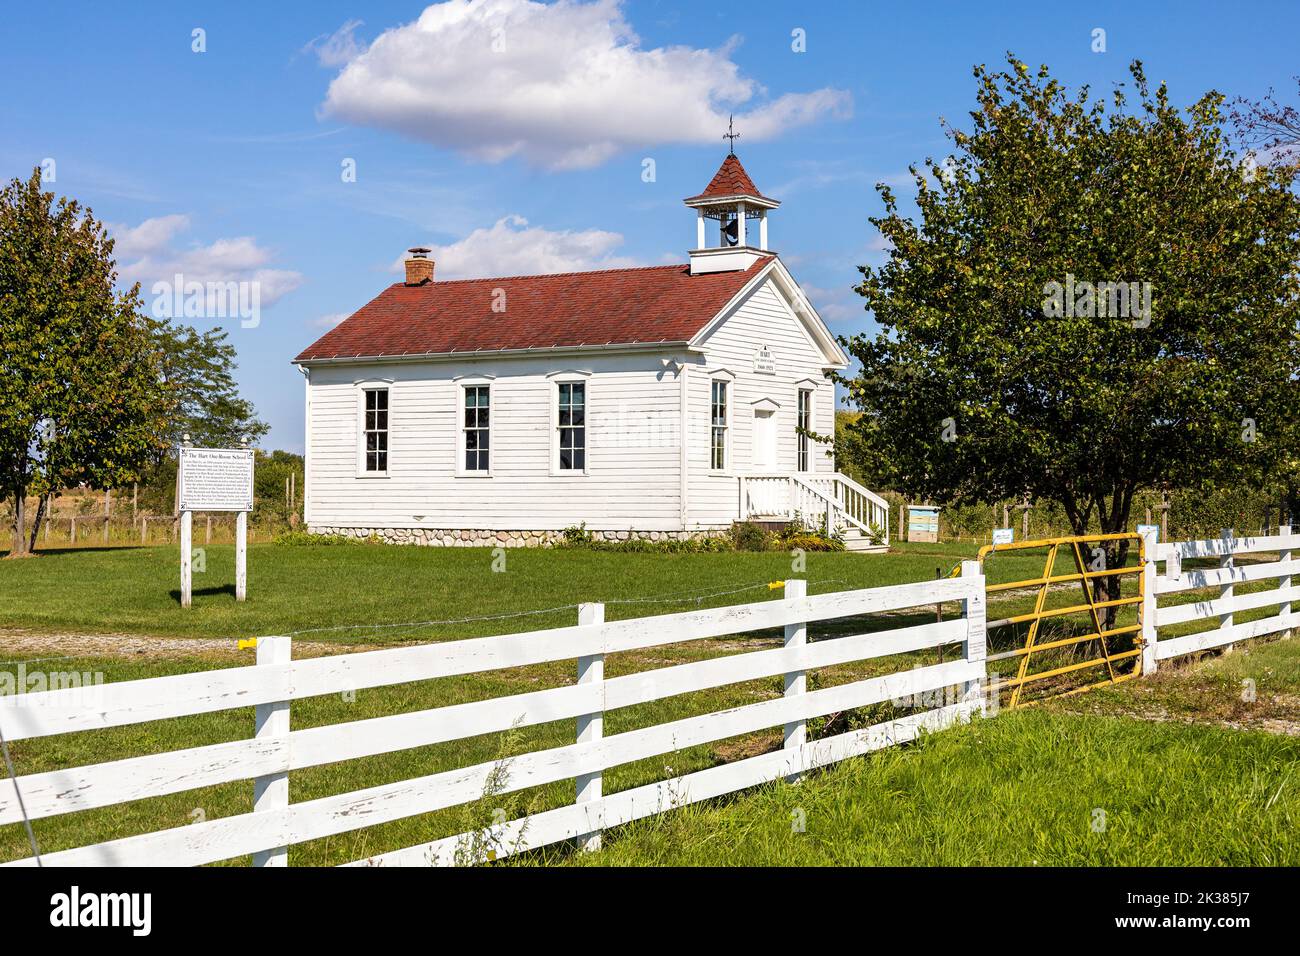 The Hart One Room School In Frankenmuth Michigan Built In 1860 In A Rural Area Outside Frankenmuth Michigan America Stock Photo